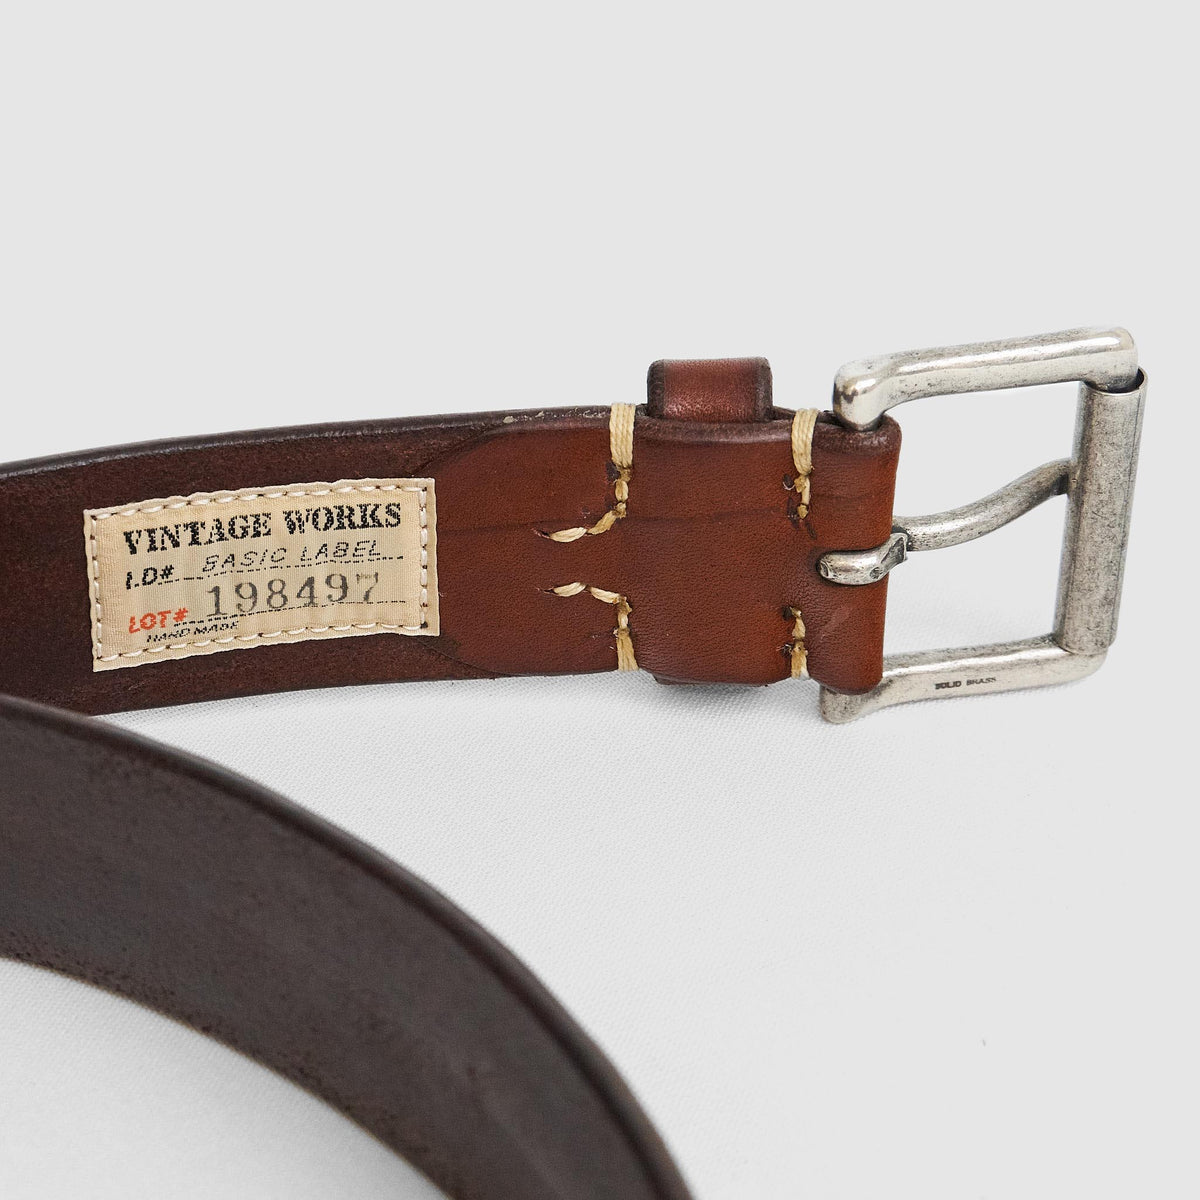 Vintage Works Classic Belt with Roller Buckle